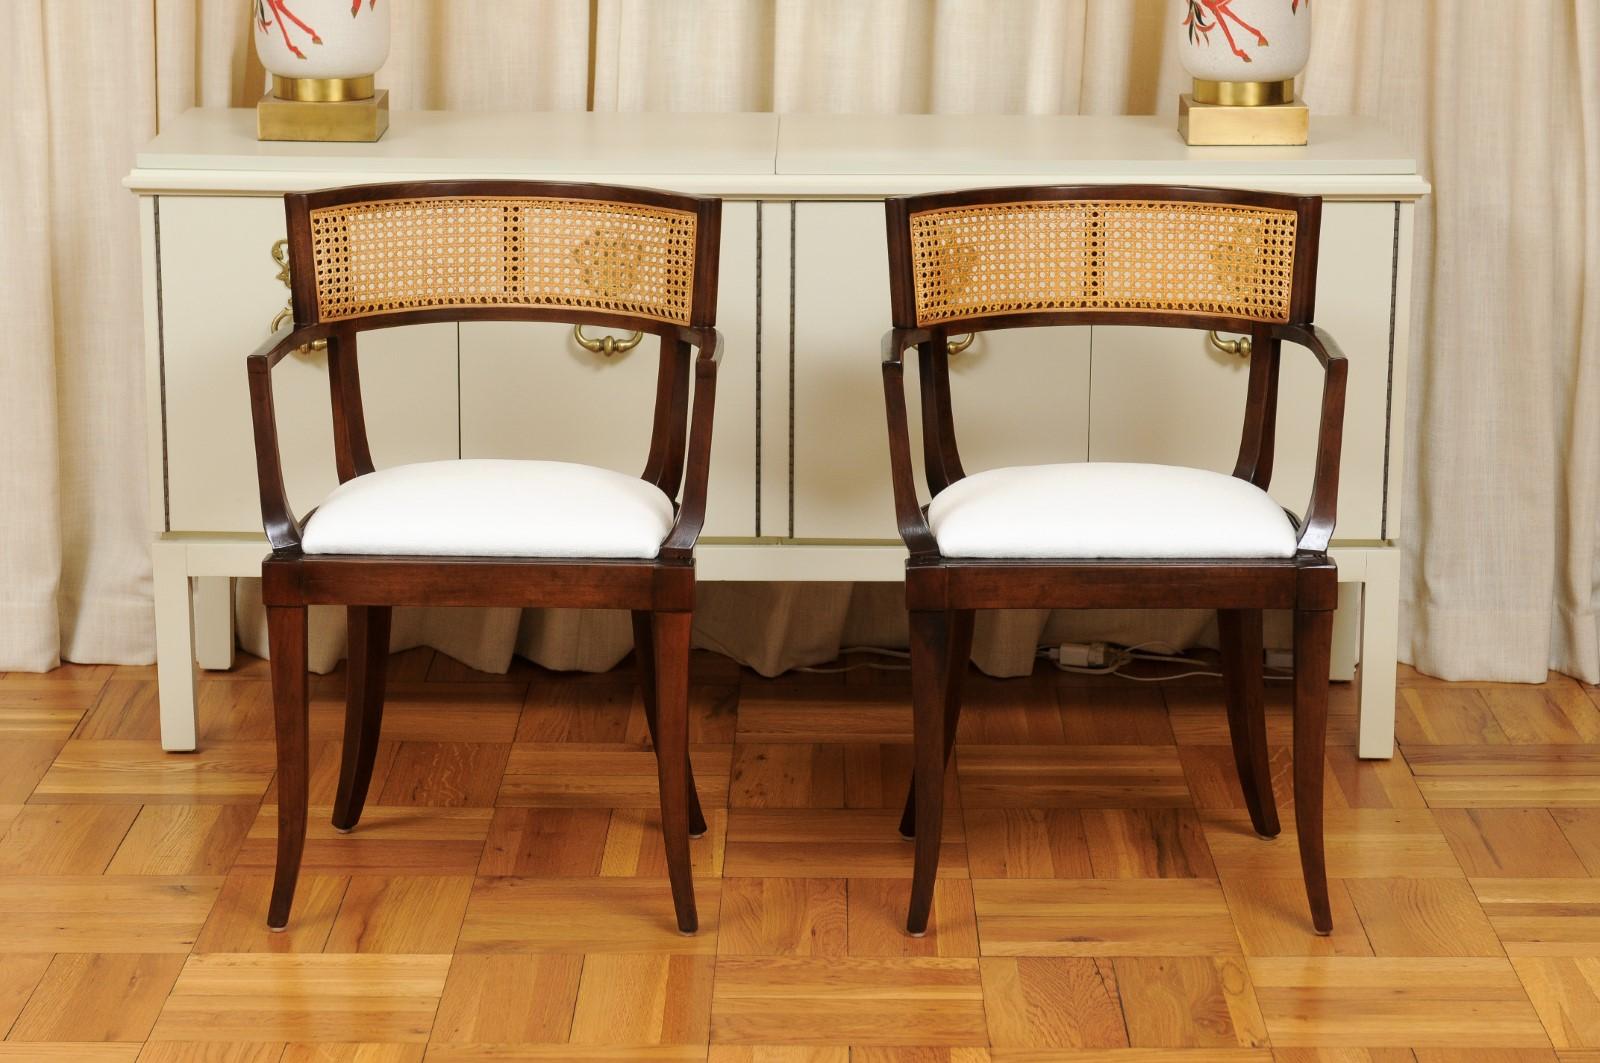 All Arms, Exquisite Set of 20 Klismos Cane Dining Chairs by Baker, circa 1958 In Excellent Condition For Sale In Atlanta, GA